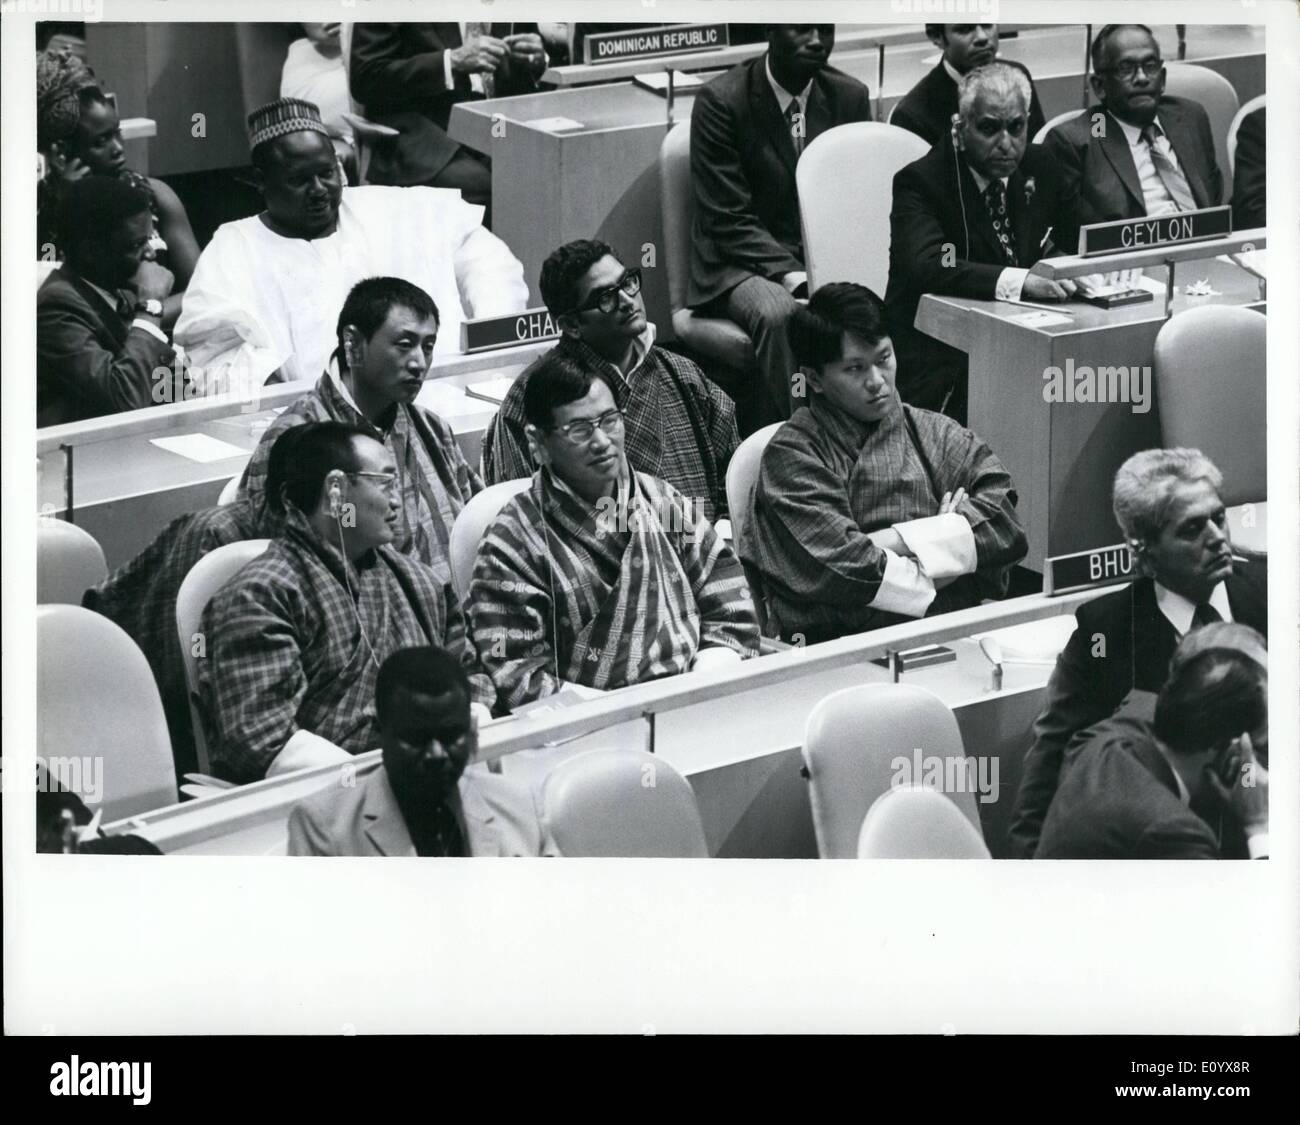 Sep. 09, 1971 - General Assembly Opens Its Twenty Sixth Regular Session: Elects Adam Malik of Indonesia As President: The General Assembly, opening its twenty sixth regular session this afternoon, elected Adam Malik, Foreign Minister of Indonesia, as its President, and admitted three new Member States; Bhutan, Bahrain and Qatar. The United Nations, with their admission, now has 130 member states. Seen here is the delegation of Bhutan headed by Prince Namgyal Wangchuk (right), Minister of Trade, Commerce and Industry Stock Photo